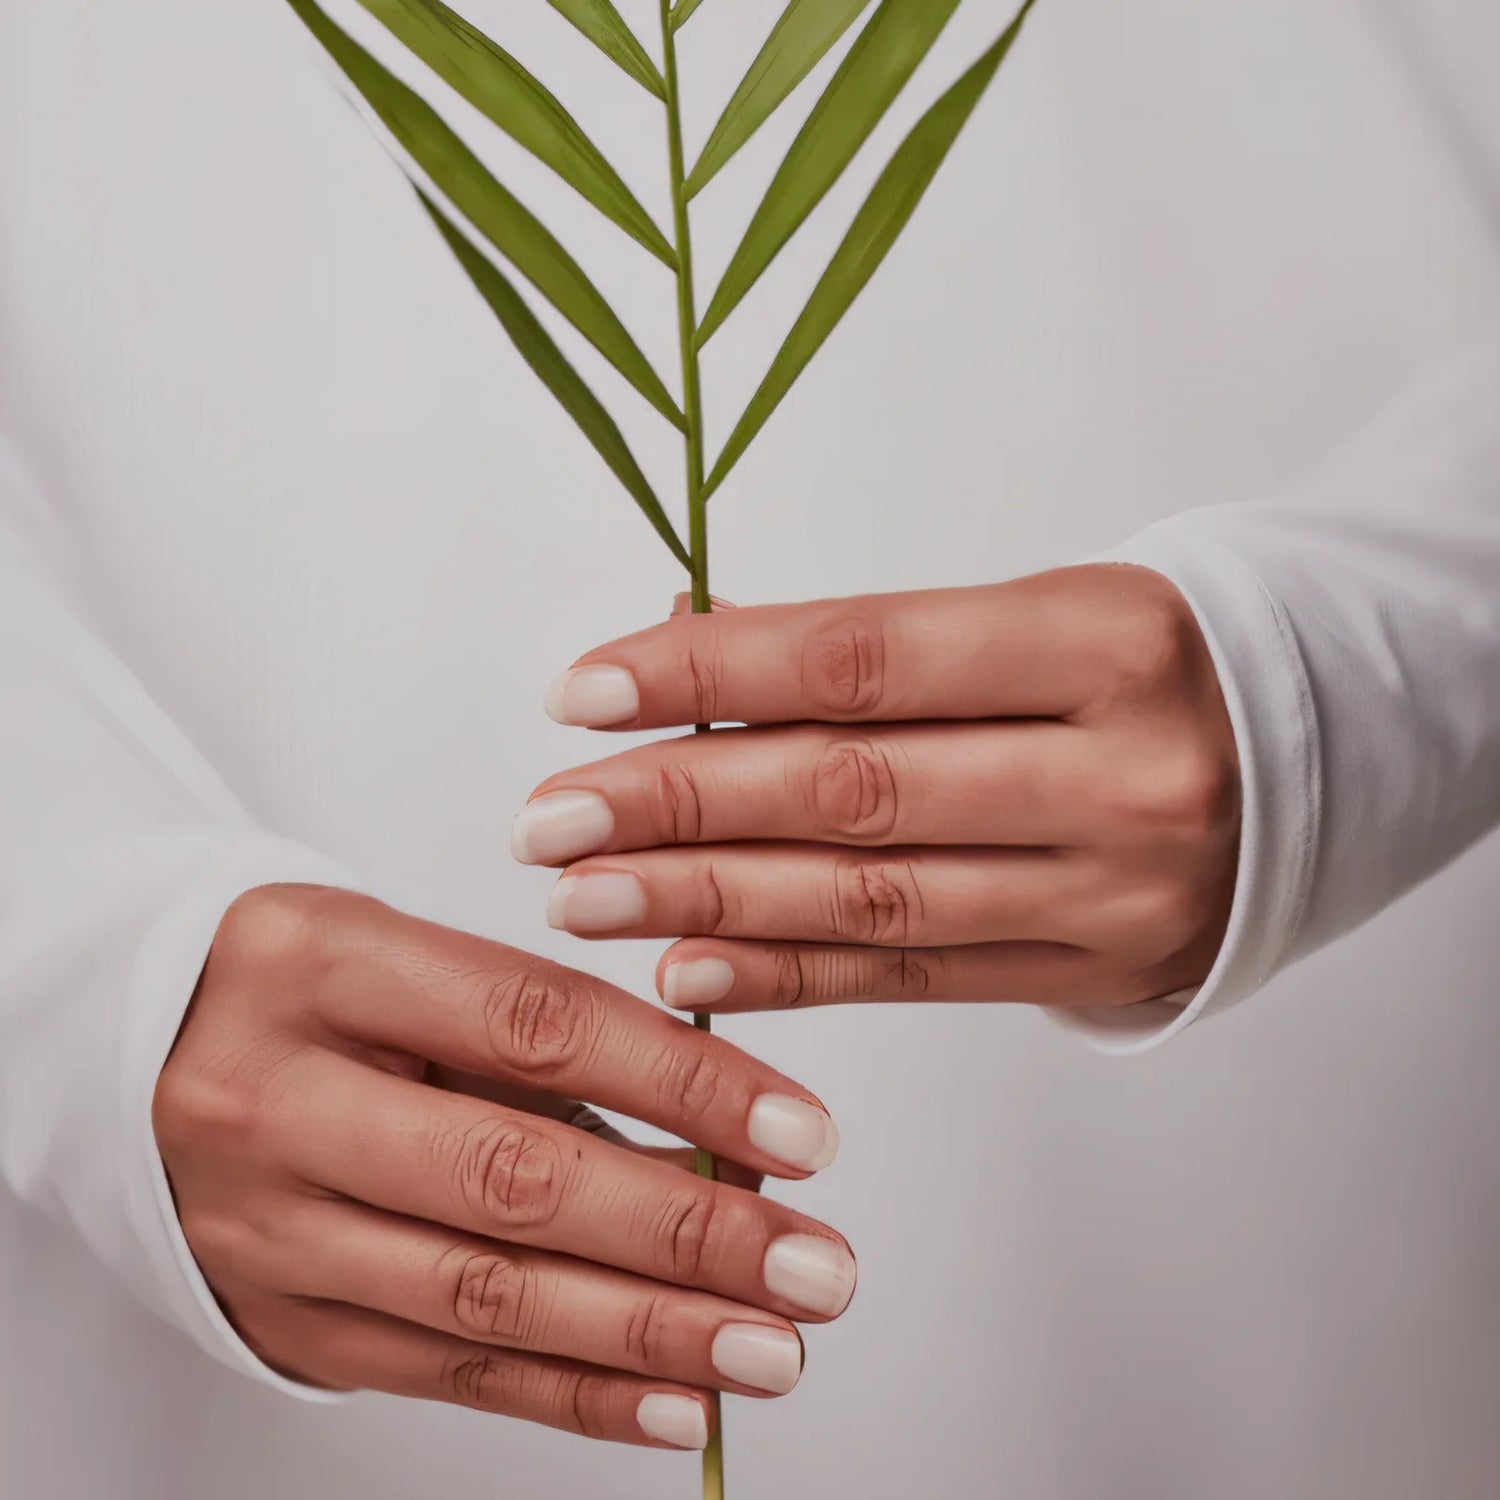 A hand holding a green plant, indicating Kayanee's commitment to using sustainable natural materials in its products